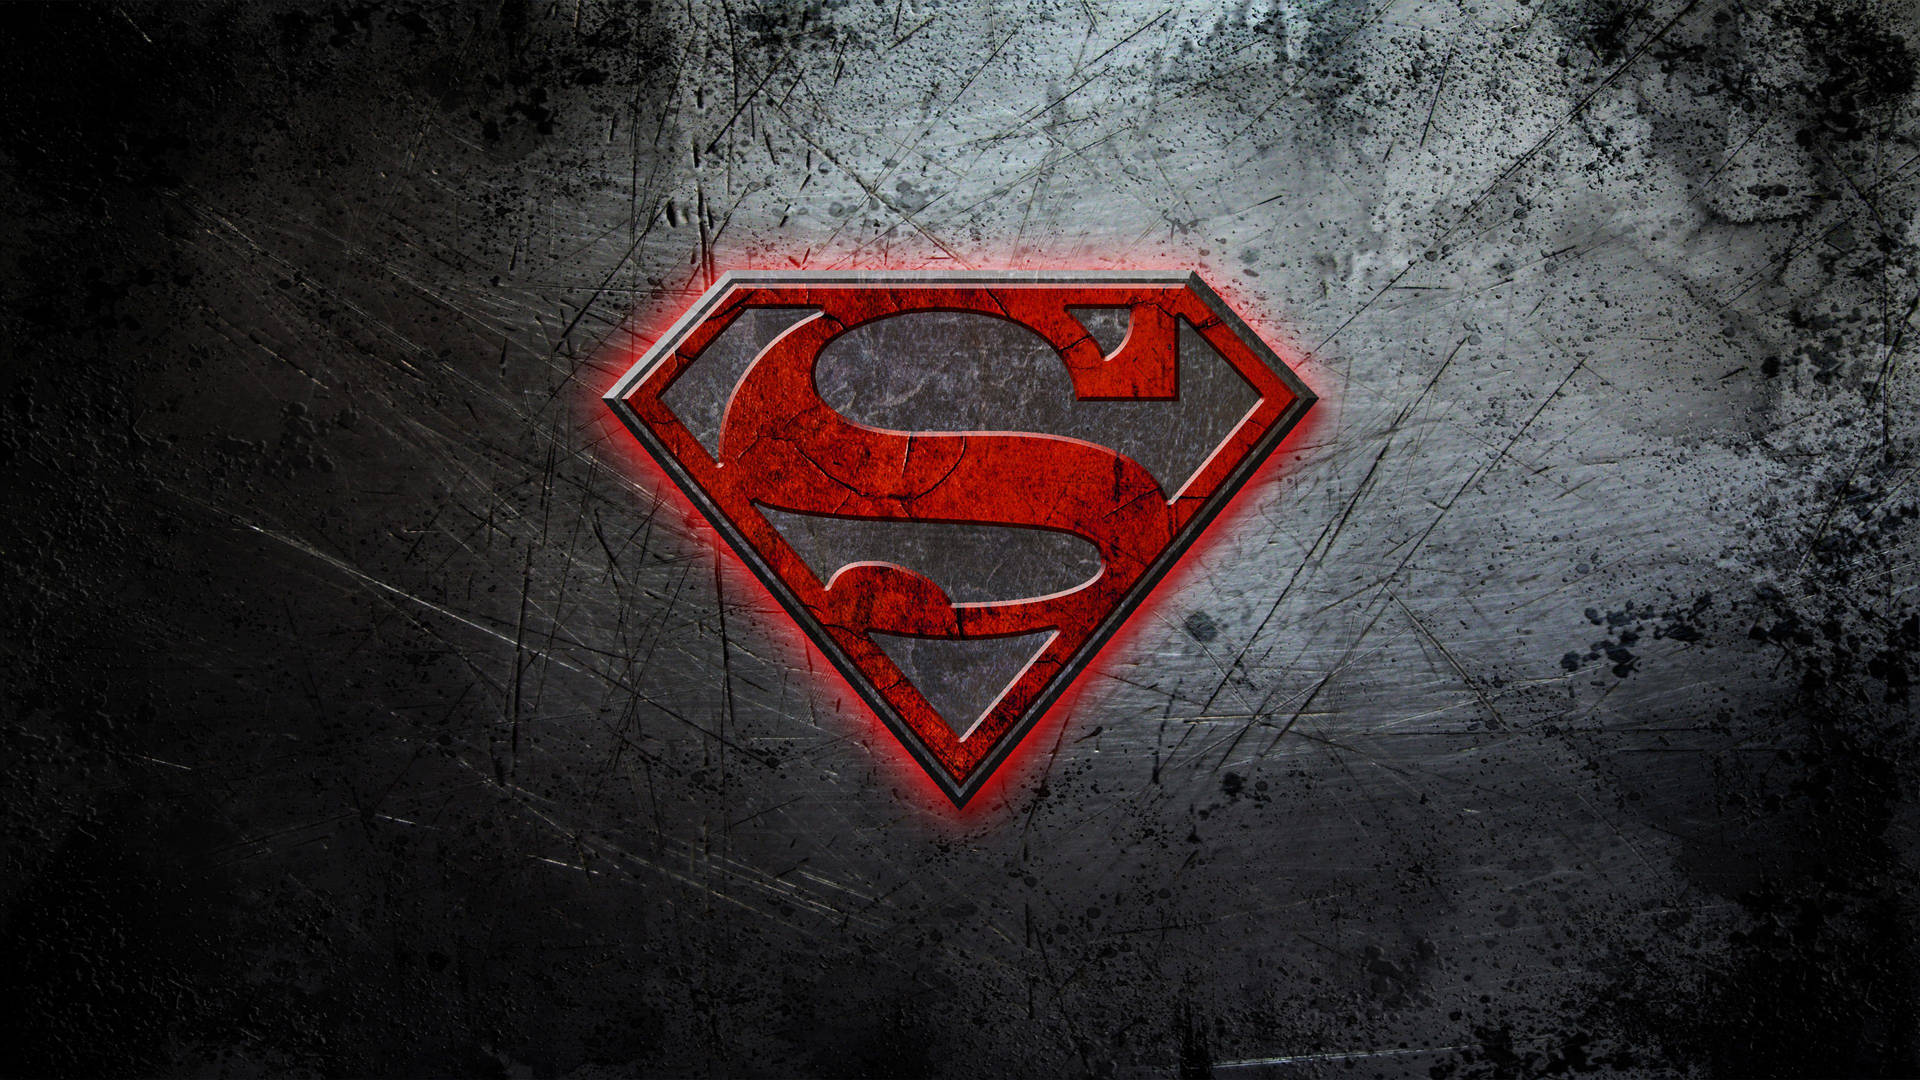 Superman Logo Wallpapers Hd Background